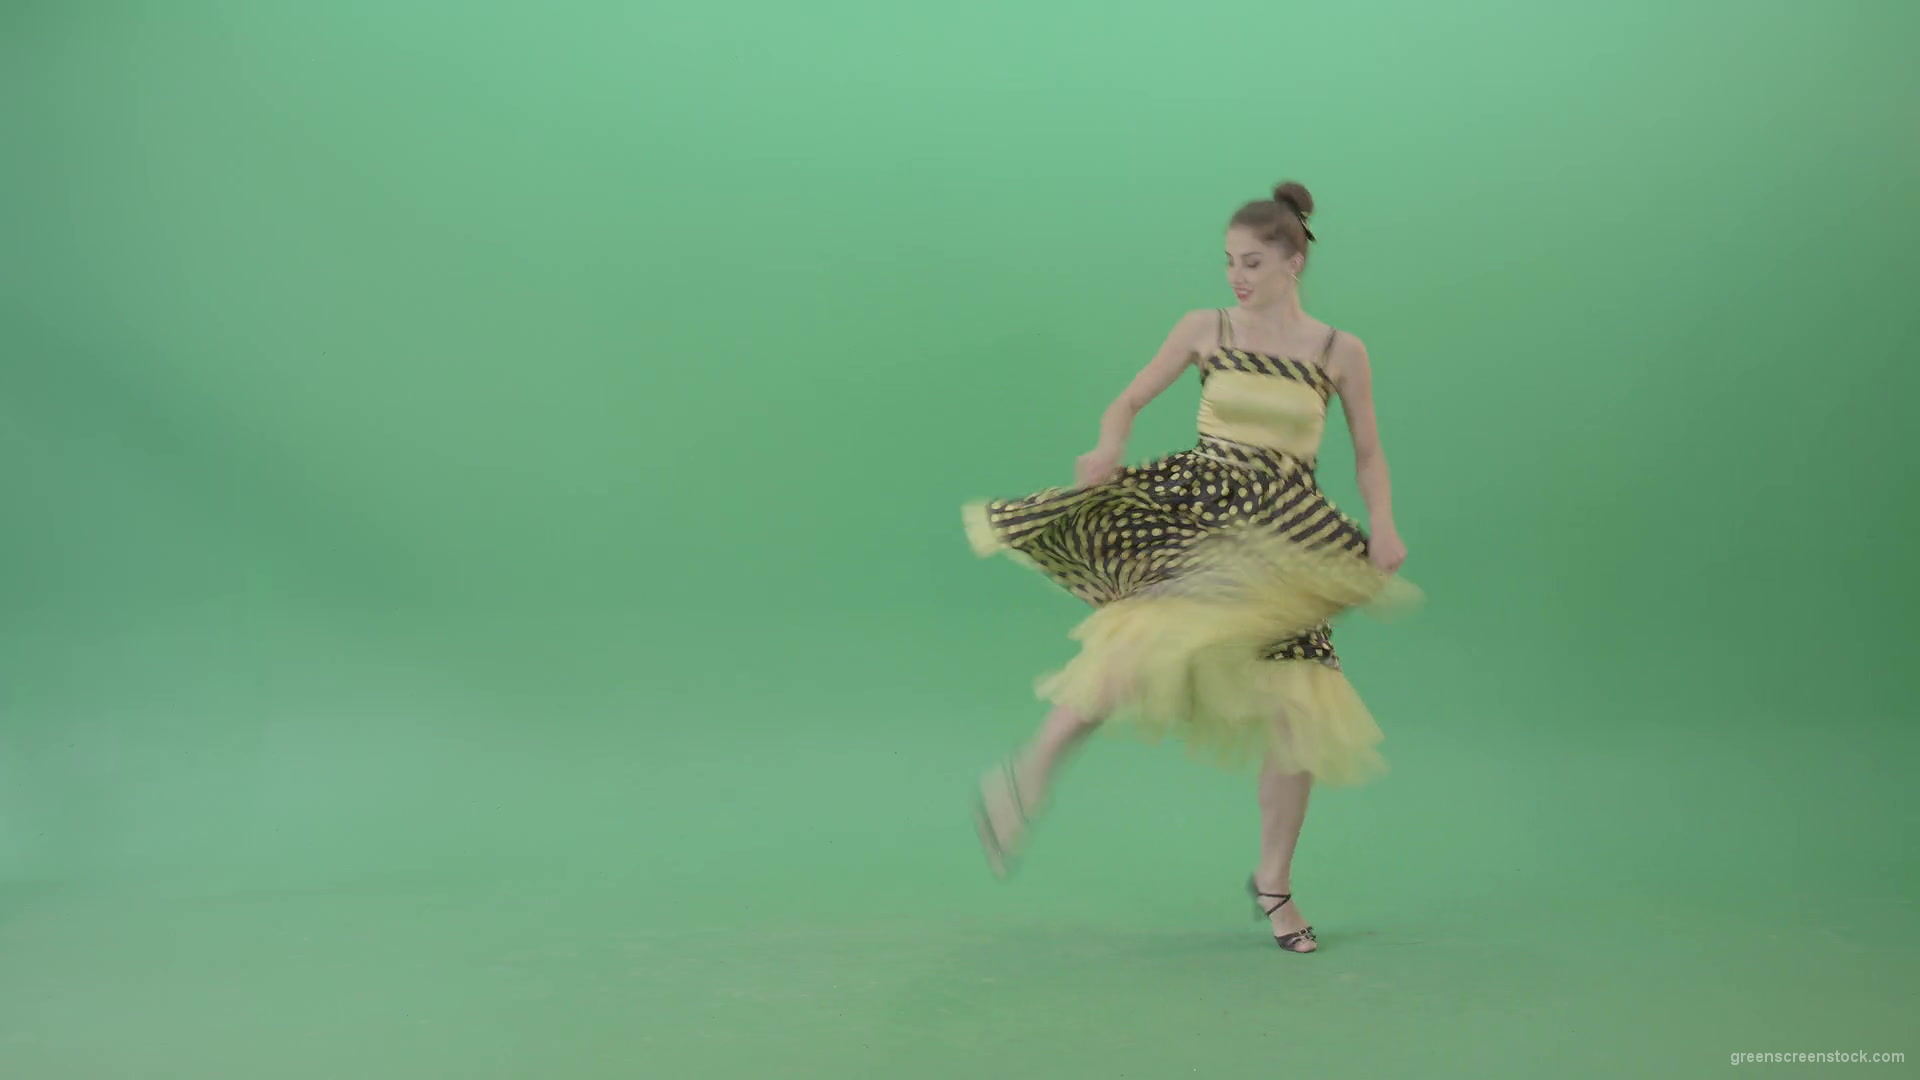 Elegant-Girl-in-Yellow-dress-Dancing-Boogie-woogie-and-chill-on-Green-Screen-4K-Video-Footage-1920_005 Green Screen Stock